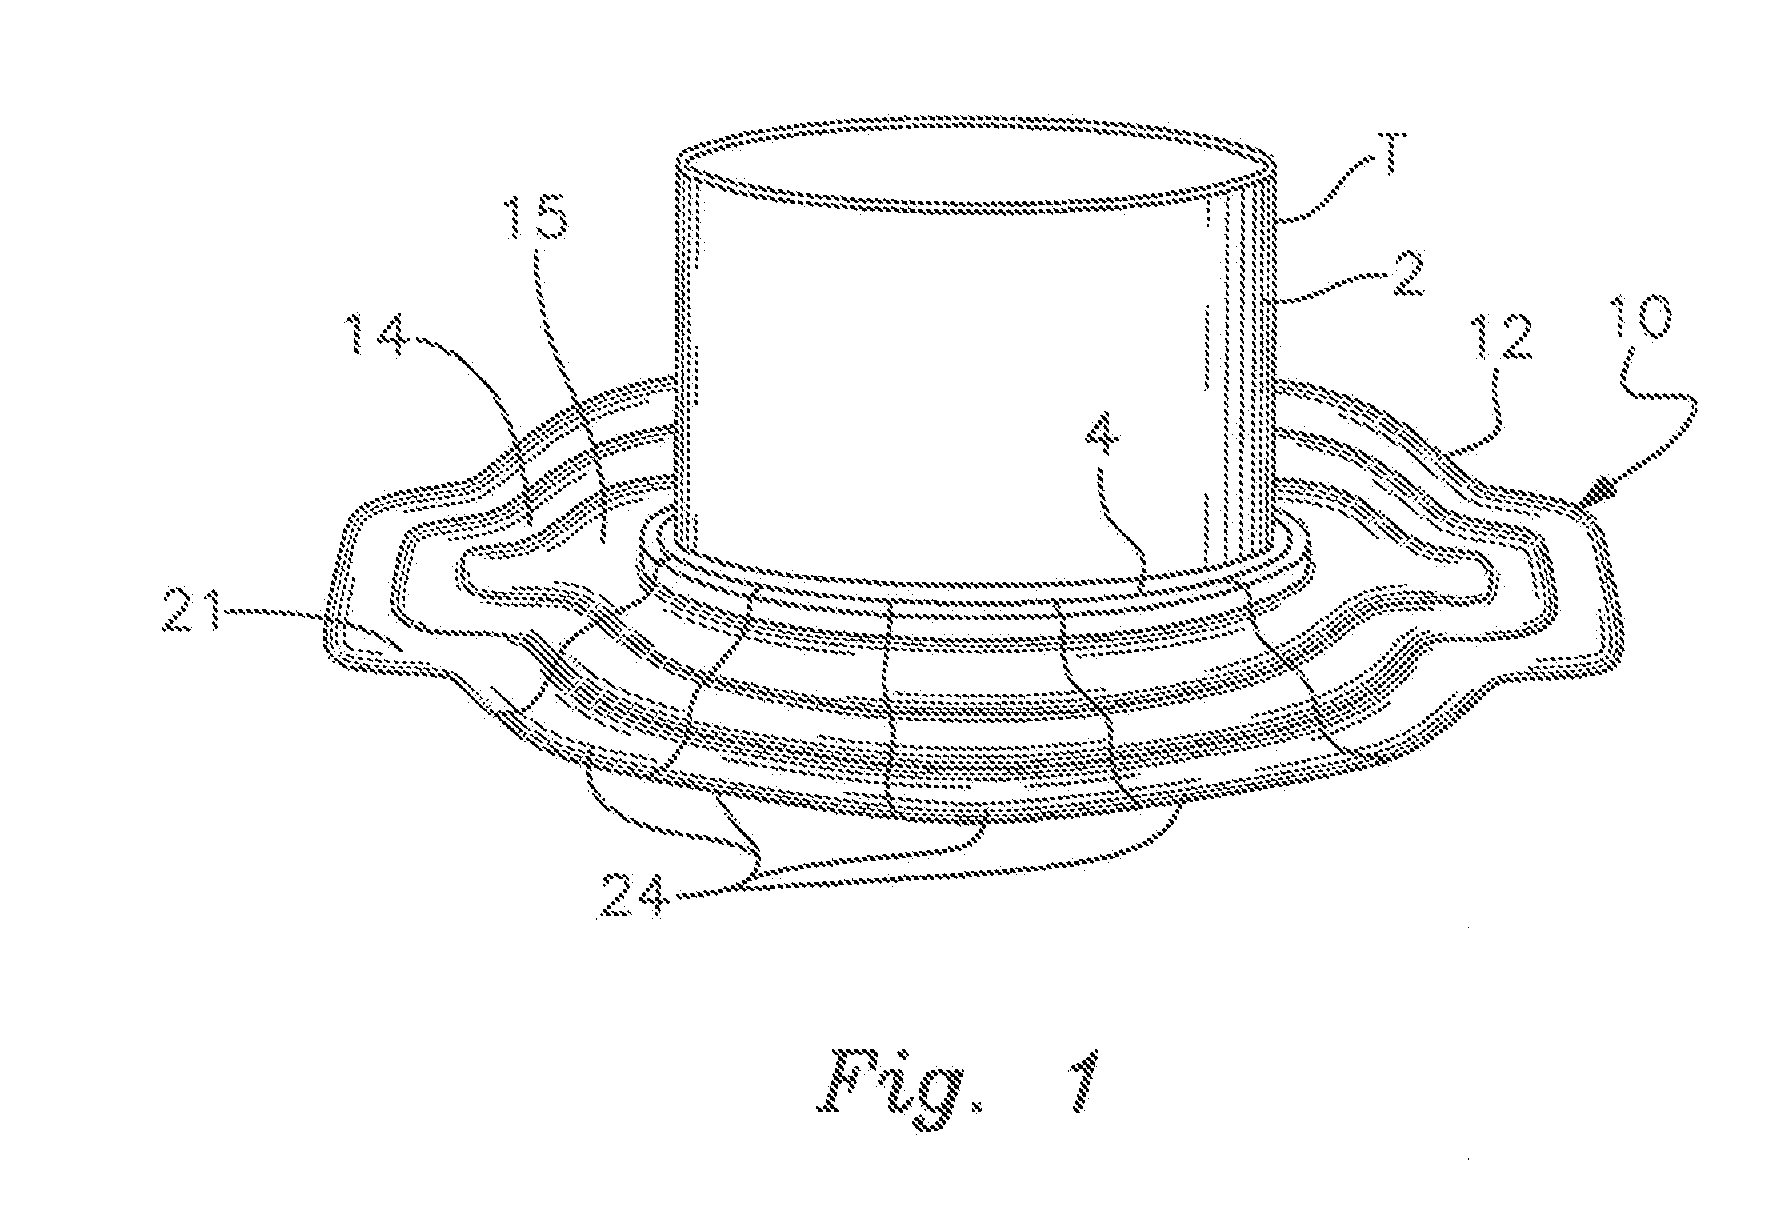 Secondary Containment Panels and Process for Making and Installing Same